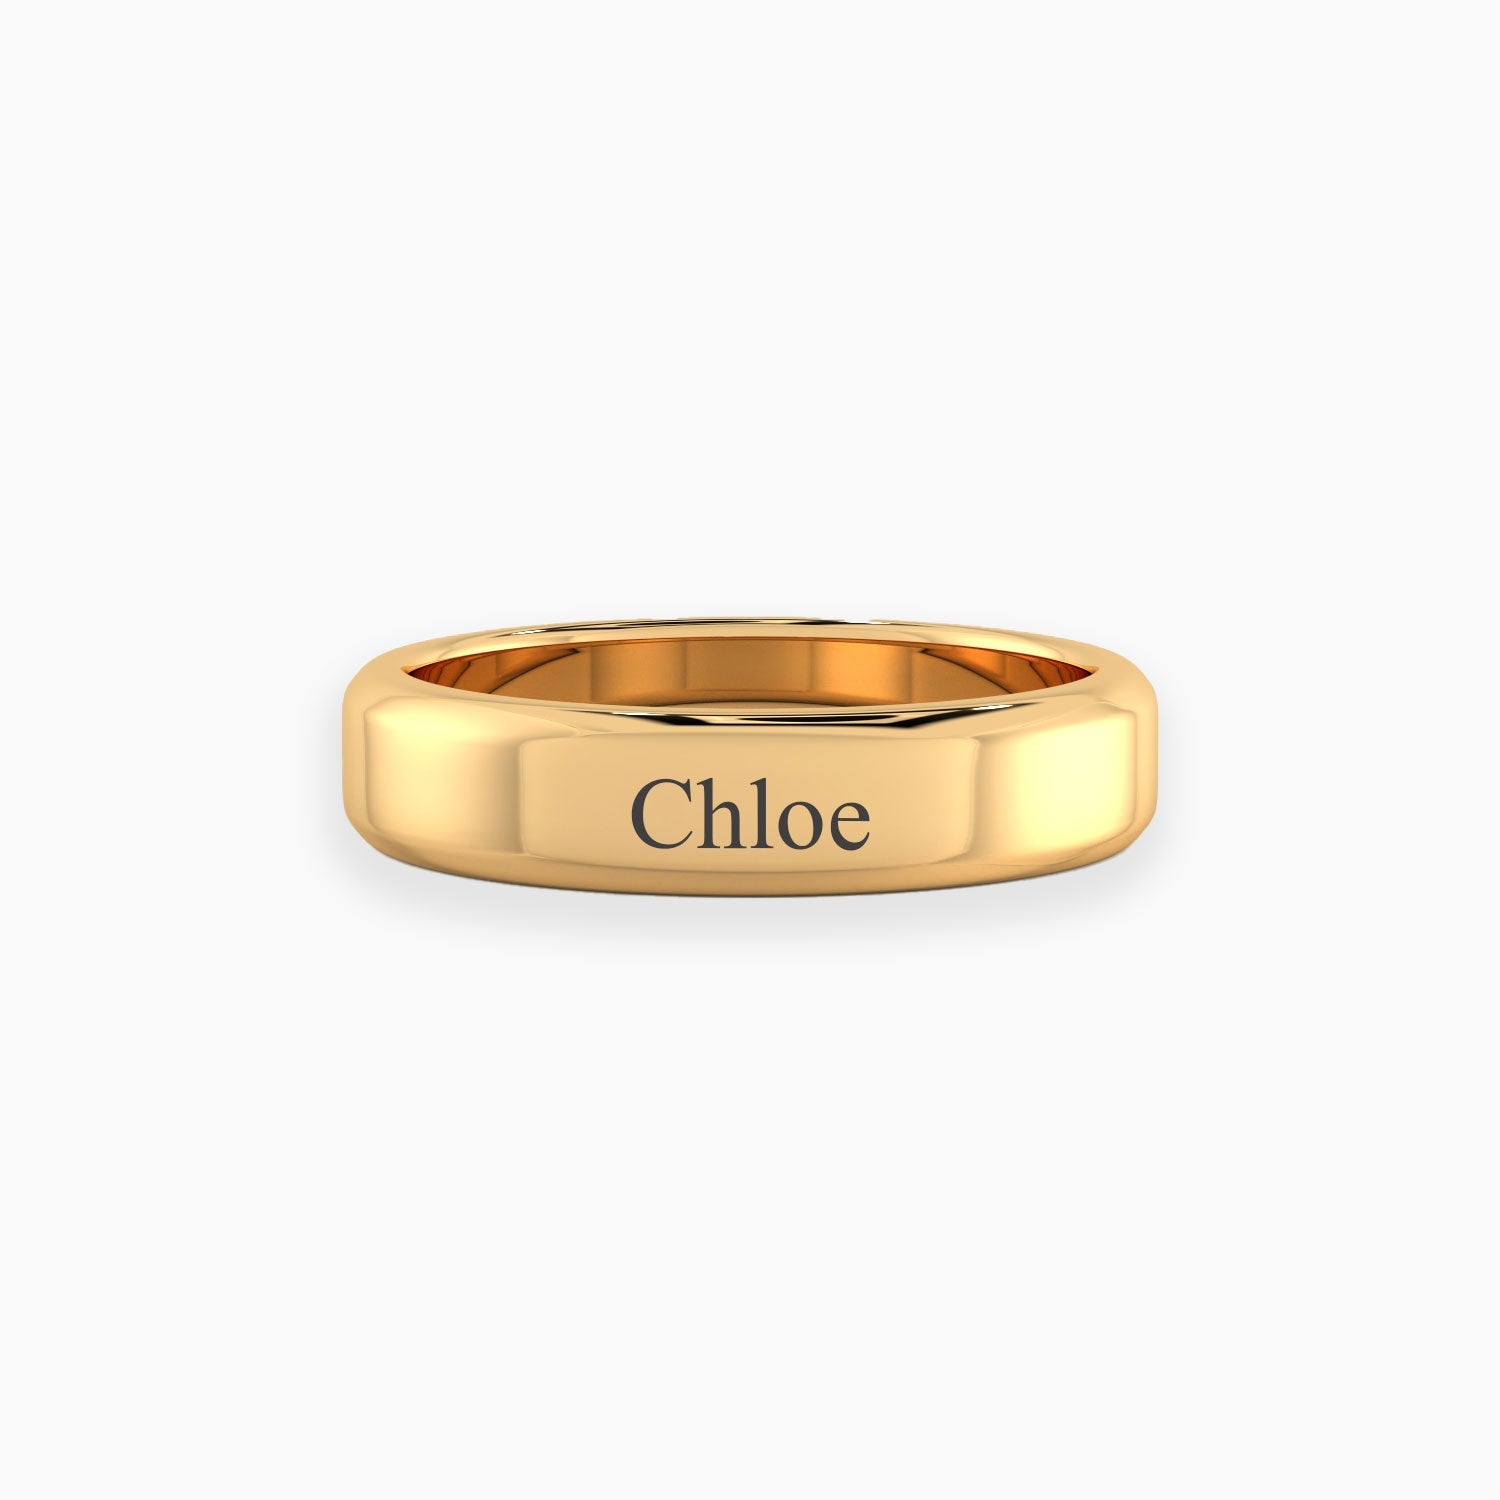 front view of gold plated ring with chloe engraved on it